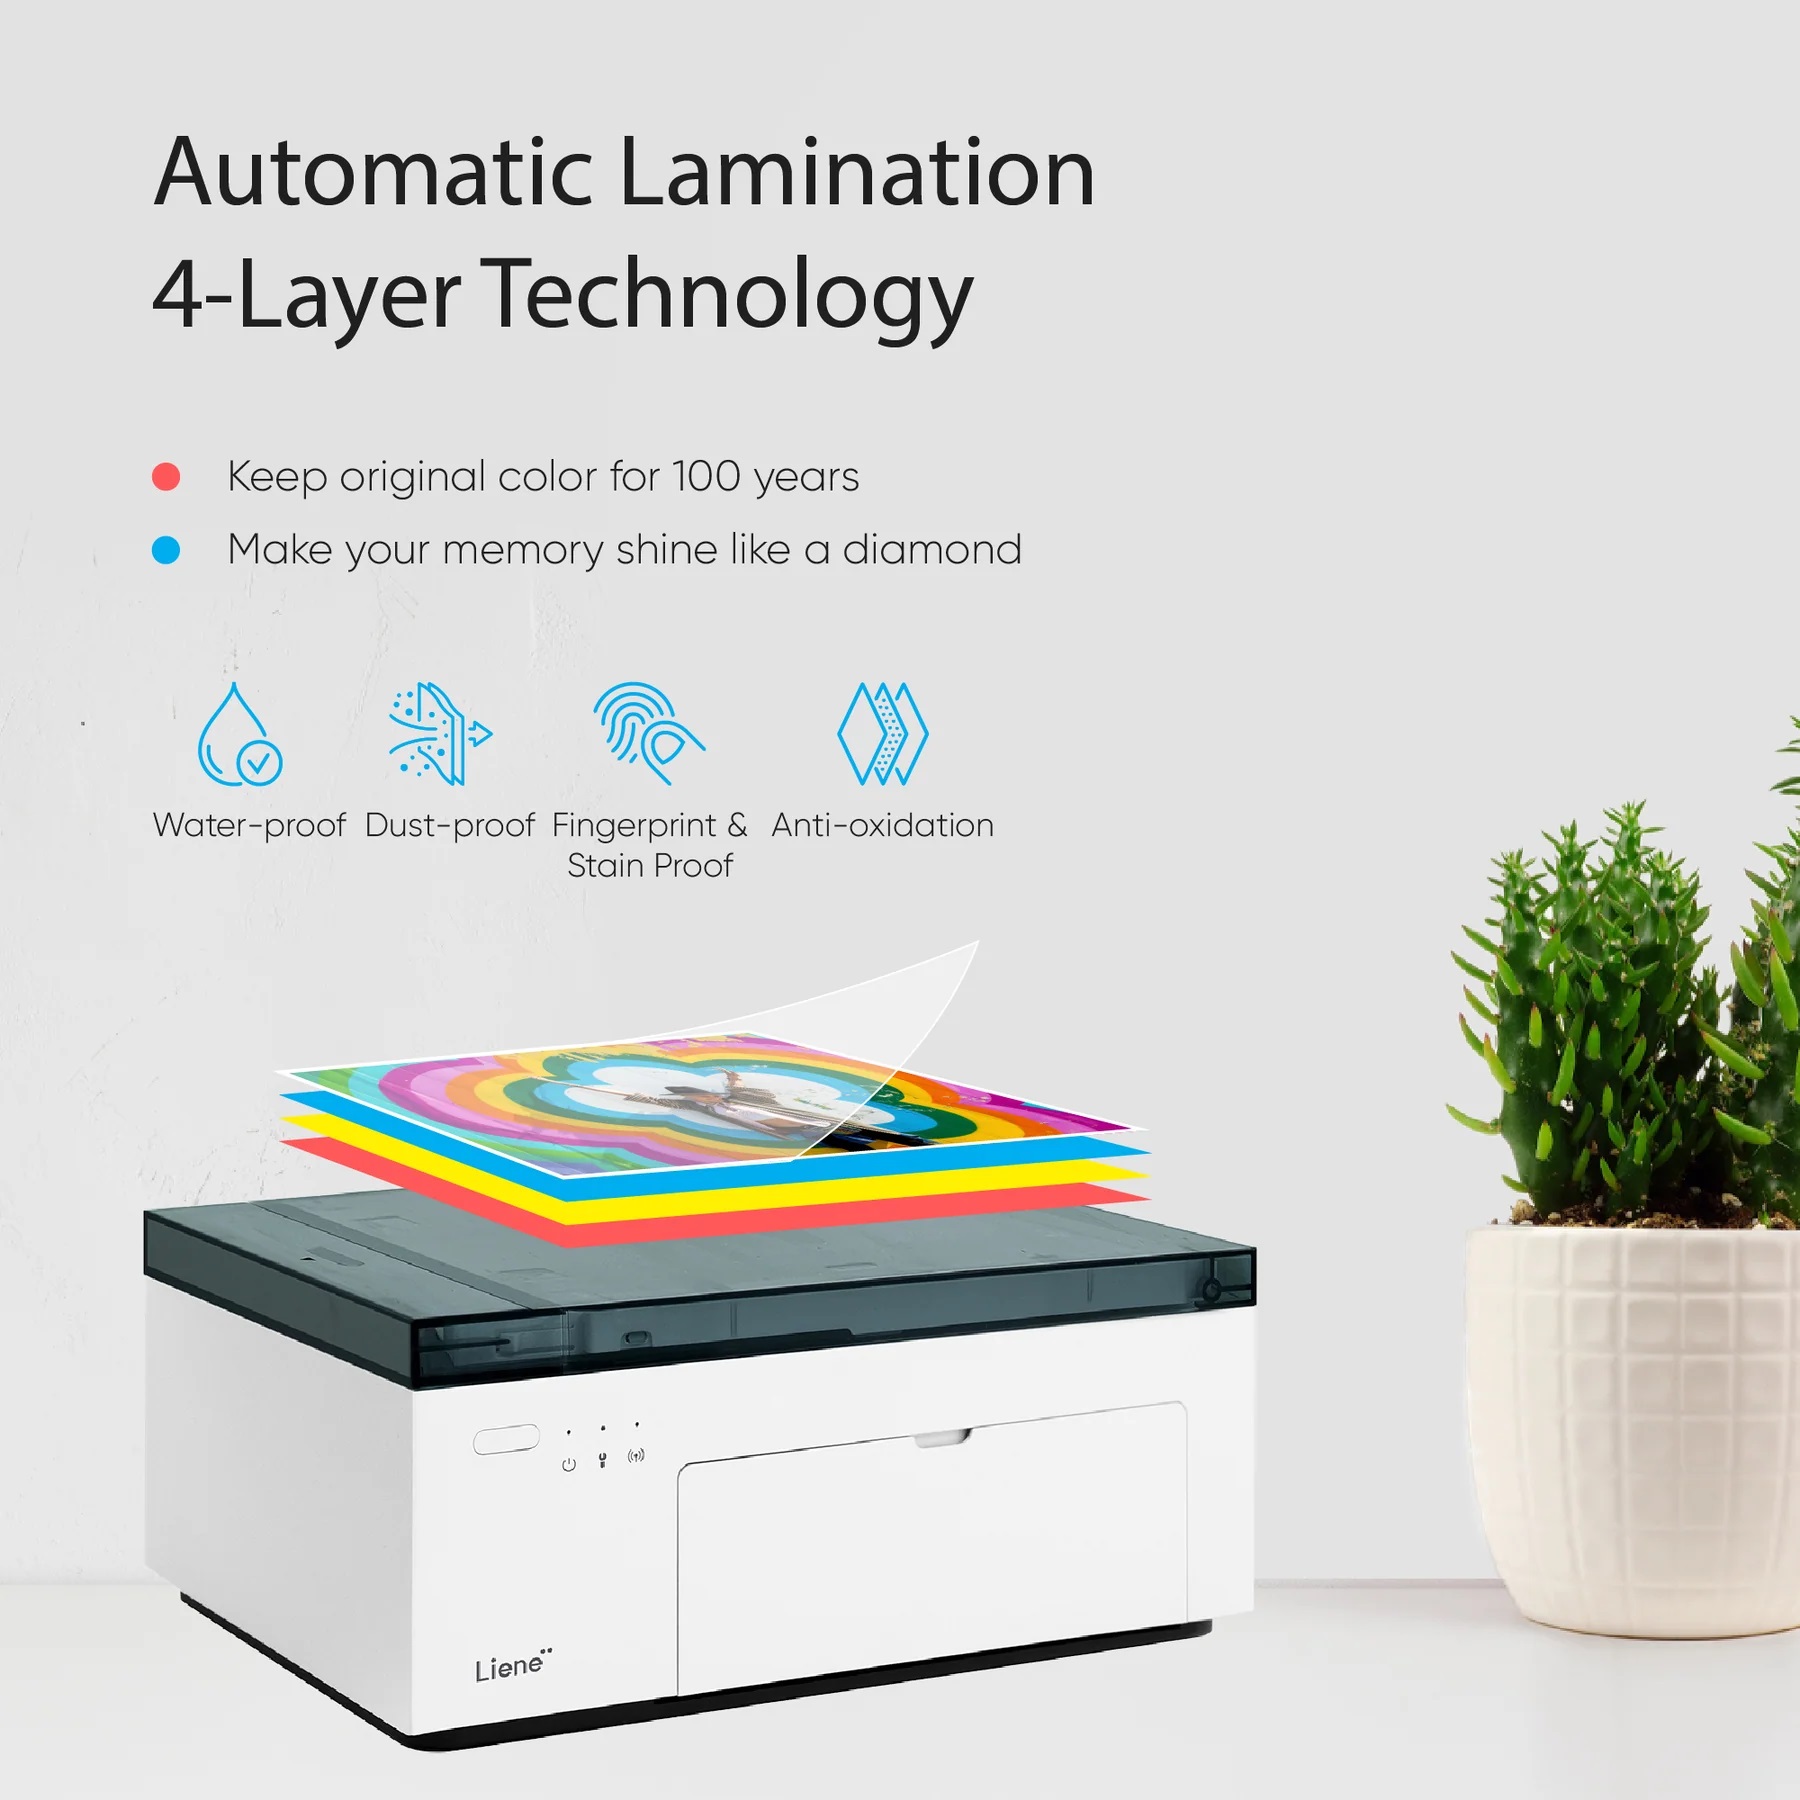 All About 4-Layer Lamination Technology in Instant Printers